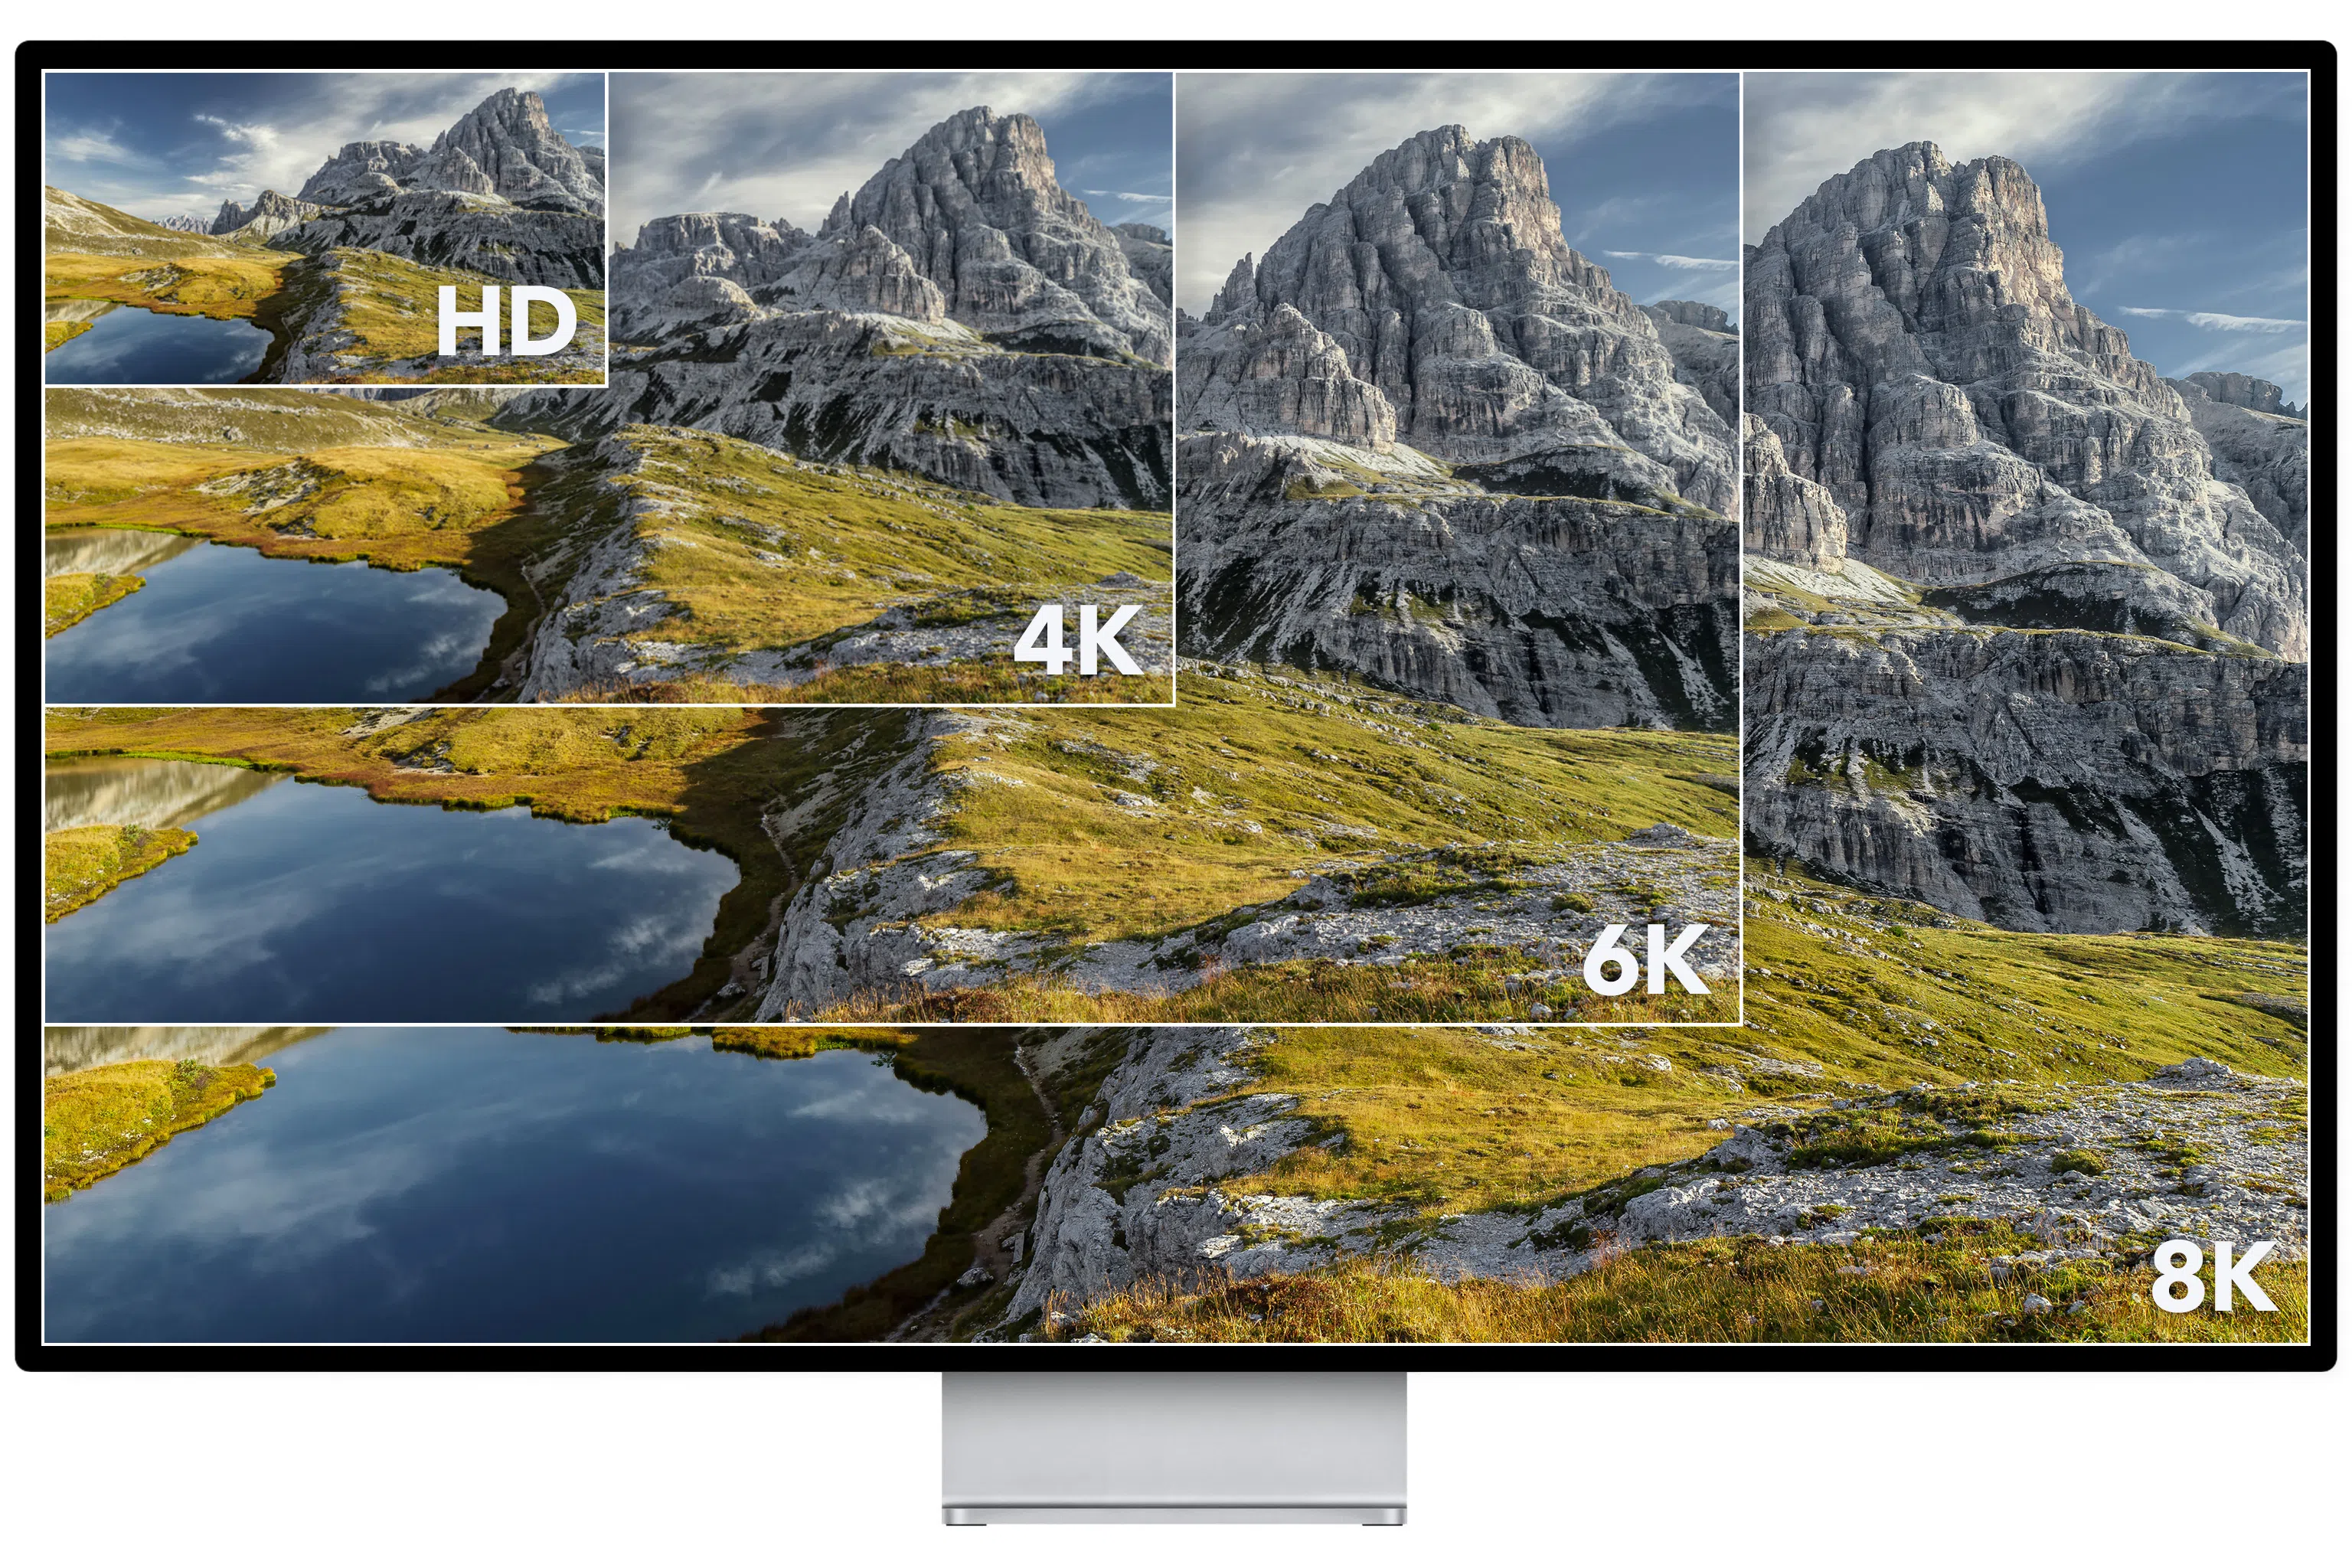 8K Support and Comparison